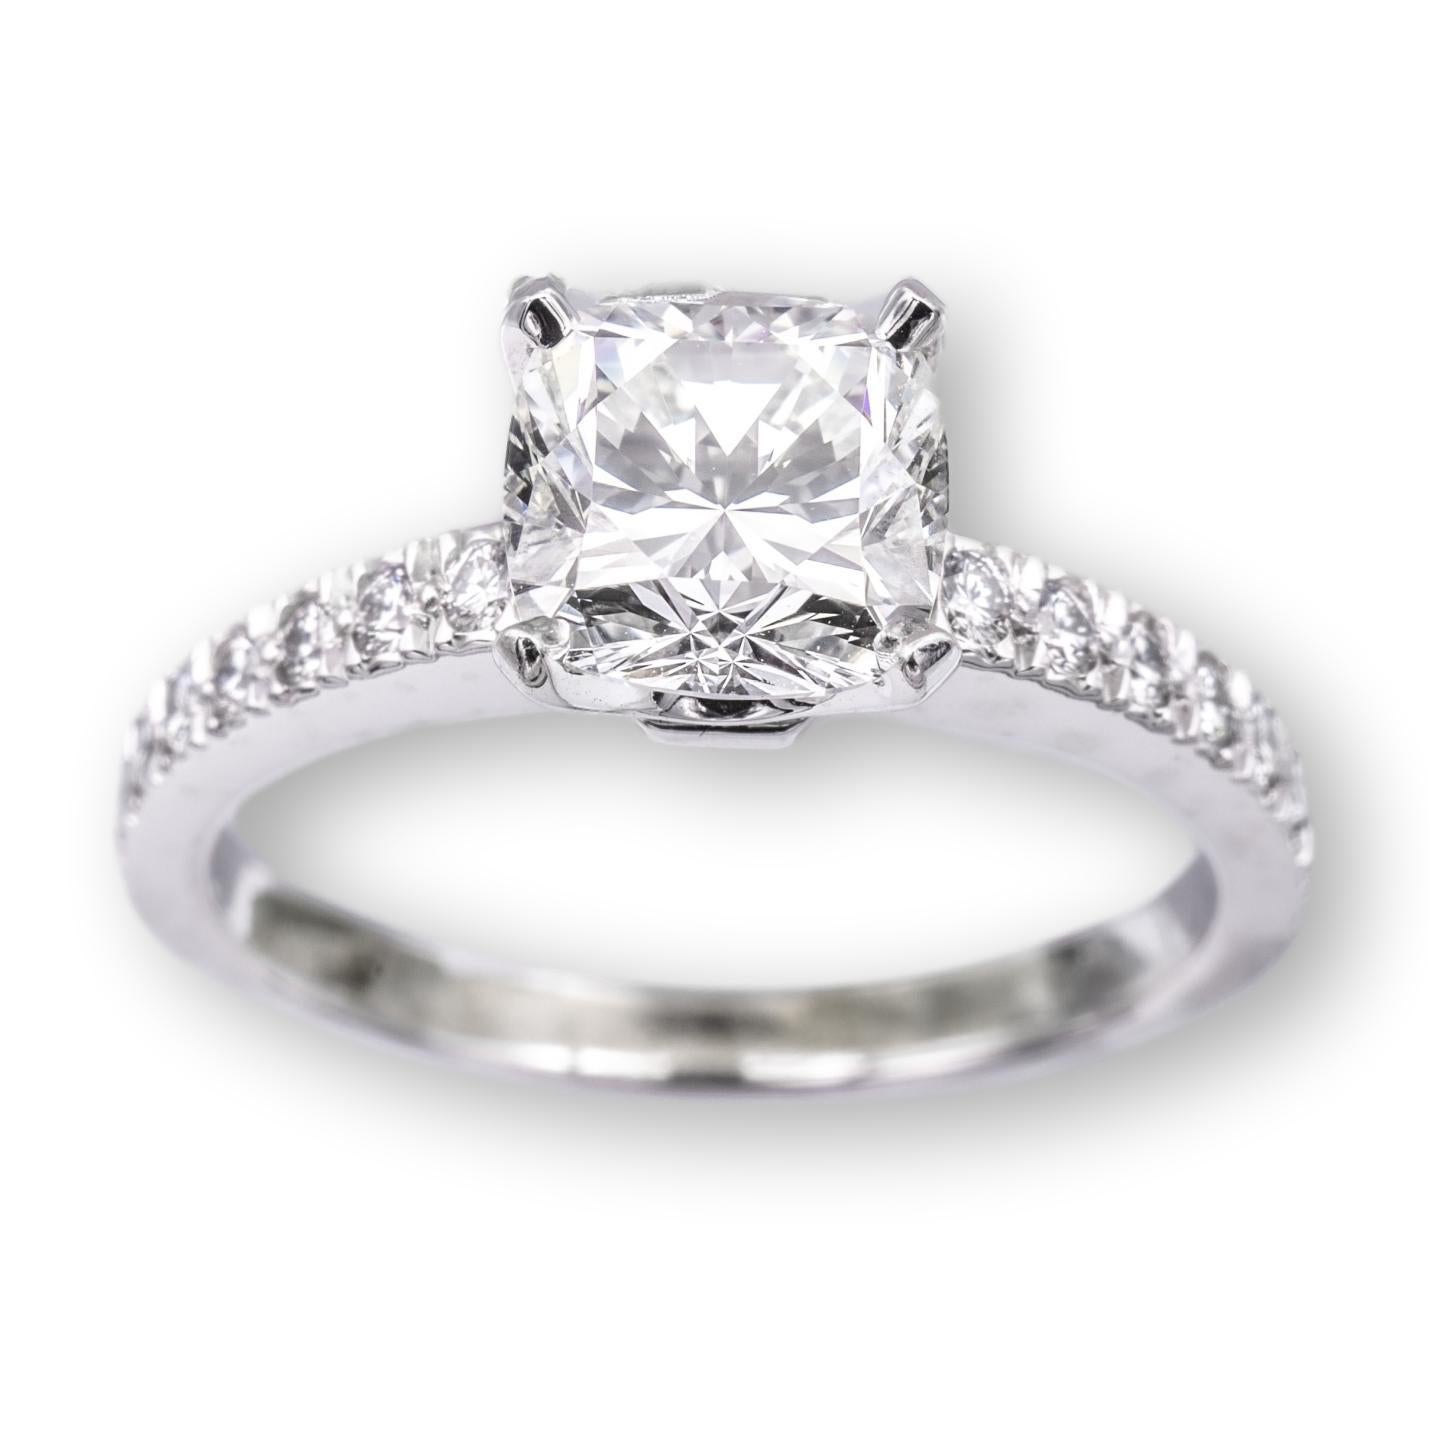 Tiffany & Co. engagement ring from the Novo collection finely crafted in platinum featuring a square cushion brilliant diamond center weighing 1.15 carats , H color , VVS2 clarity set in a 4 prong basket setting adorned with 16 bead set round